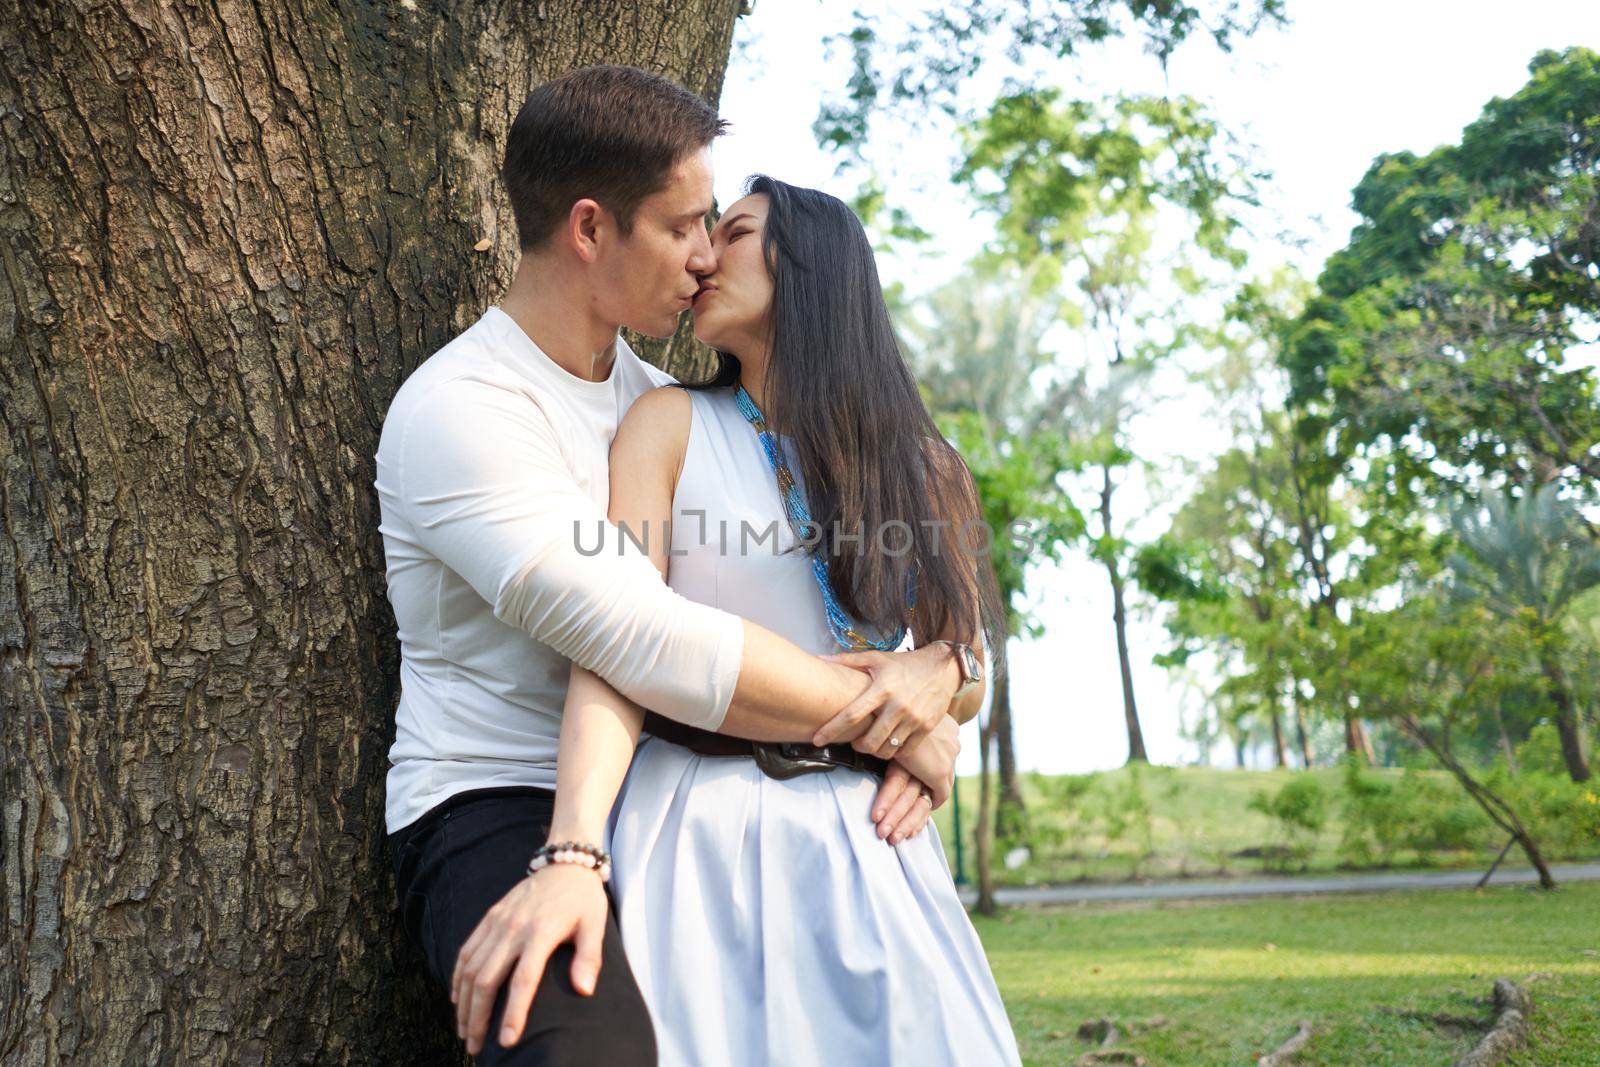 Pofile of a multicultural newlywed couple kissing next to a tree in a park by WesternExoticStockers